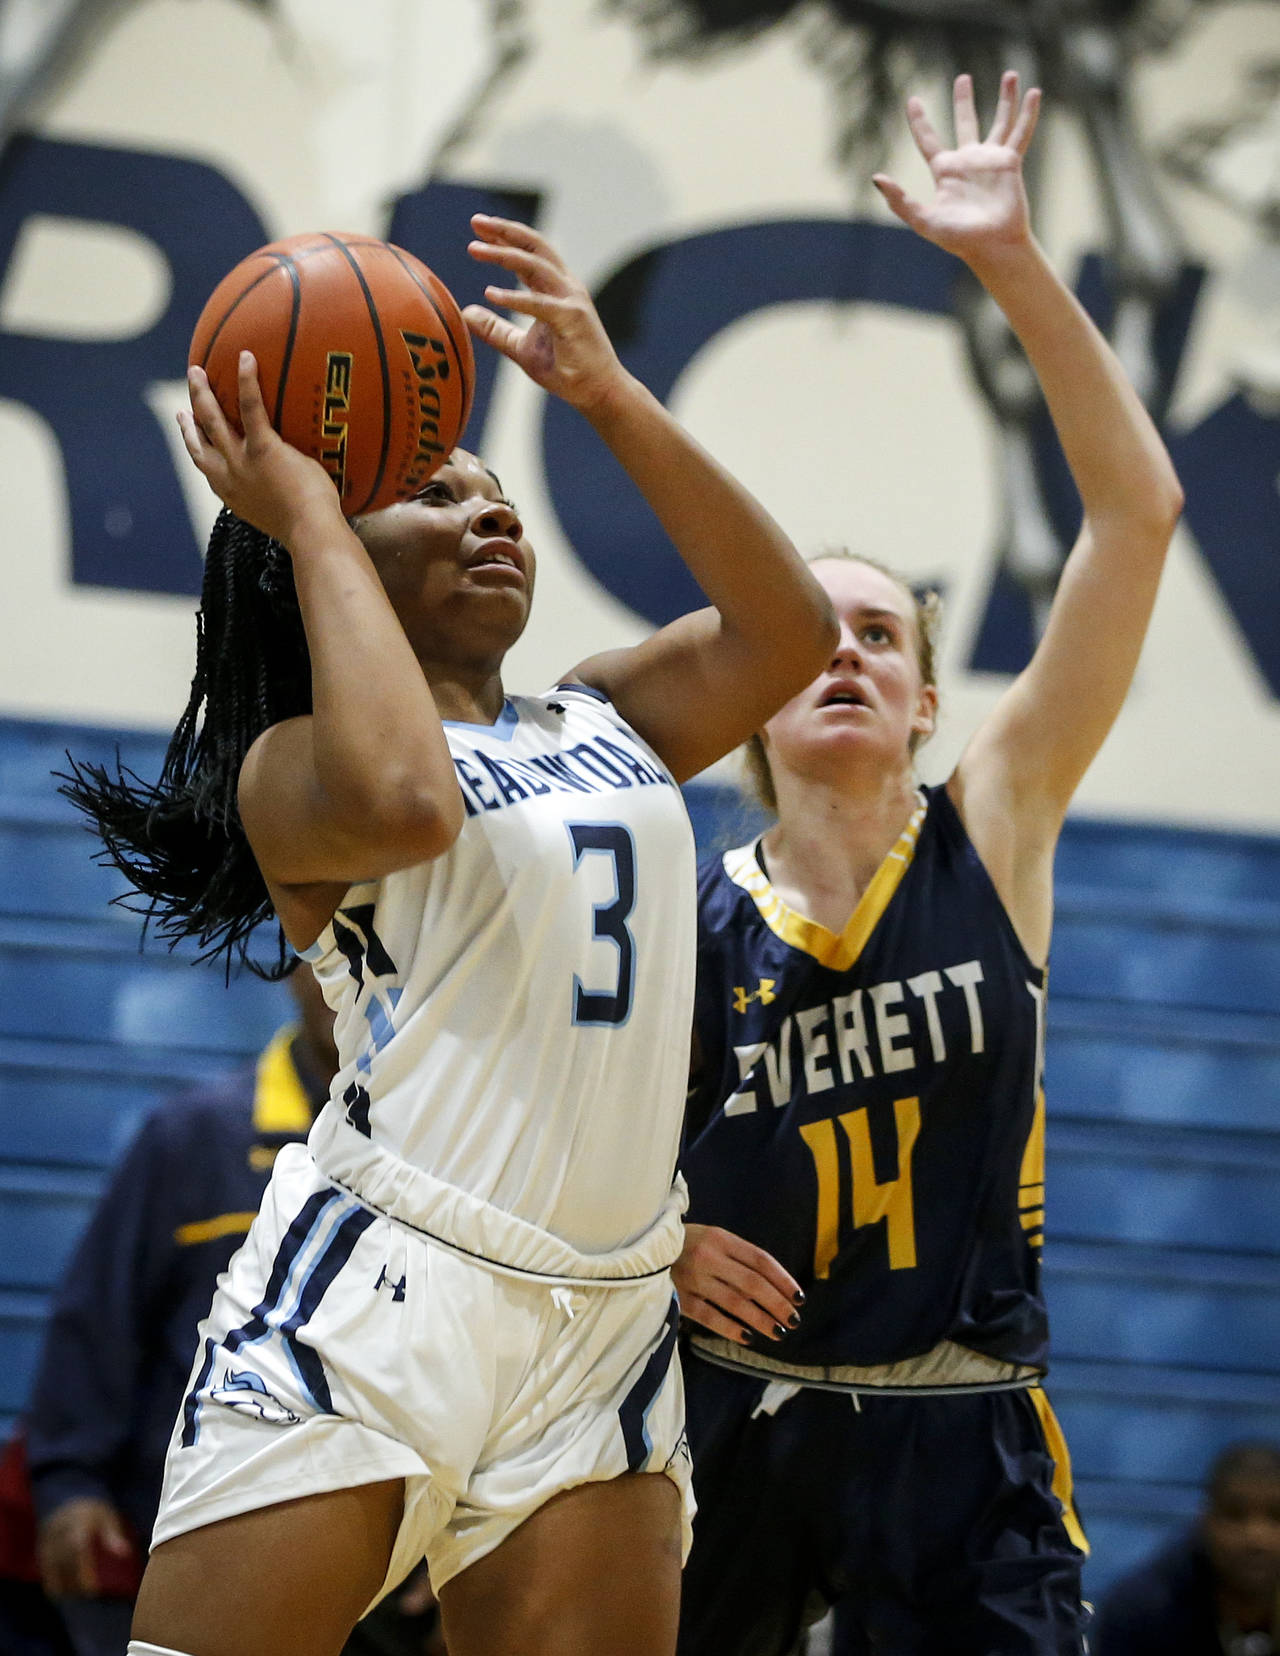 Meadowdale’s Alicia Morrison (3) goes up for a shot as Everett’s Kate Pohland (14) defends during a game Nov. 28, 2017, at Meadowdale High School in Lynnwood. (Ian Terry / The Herald)